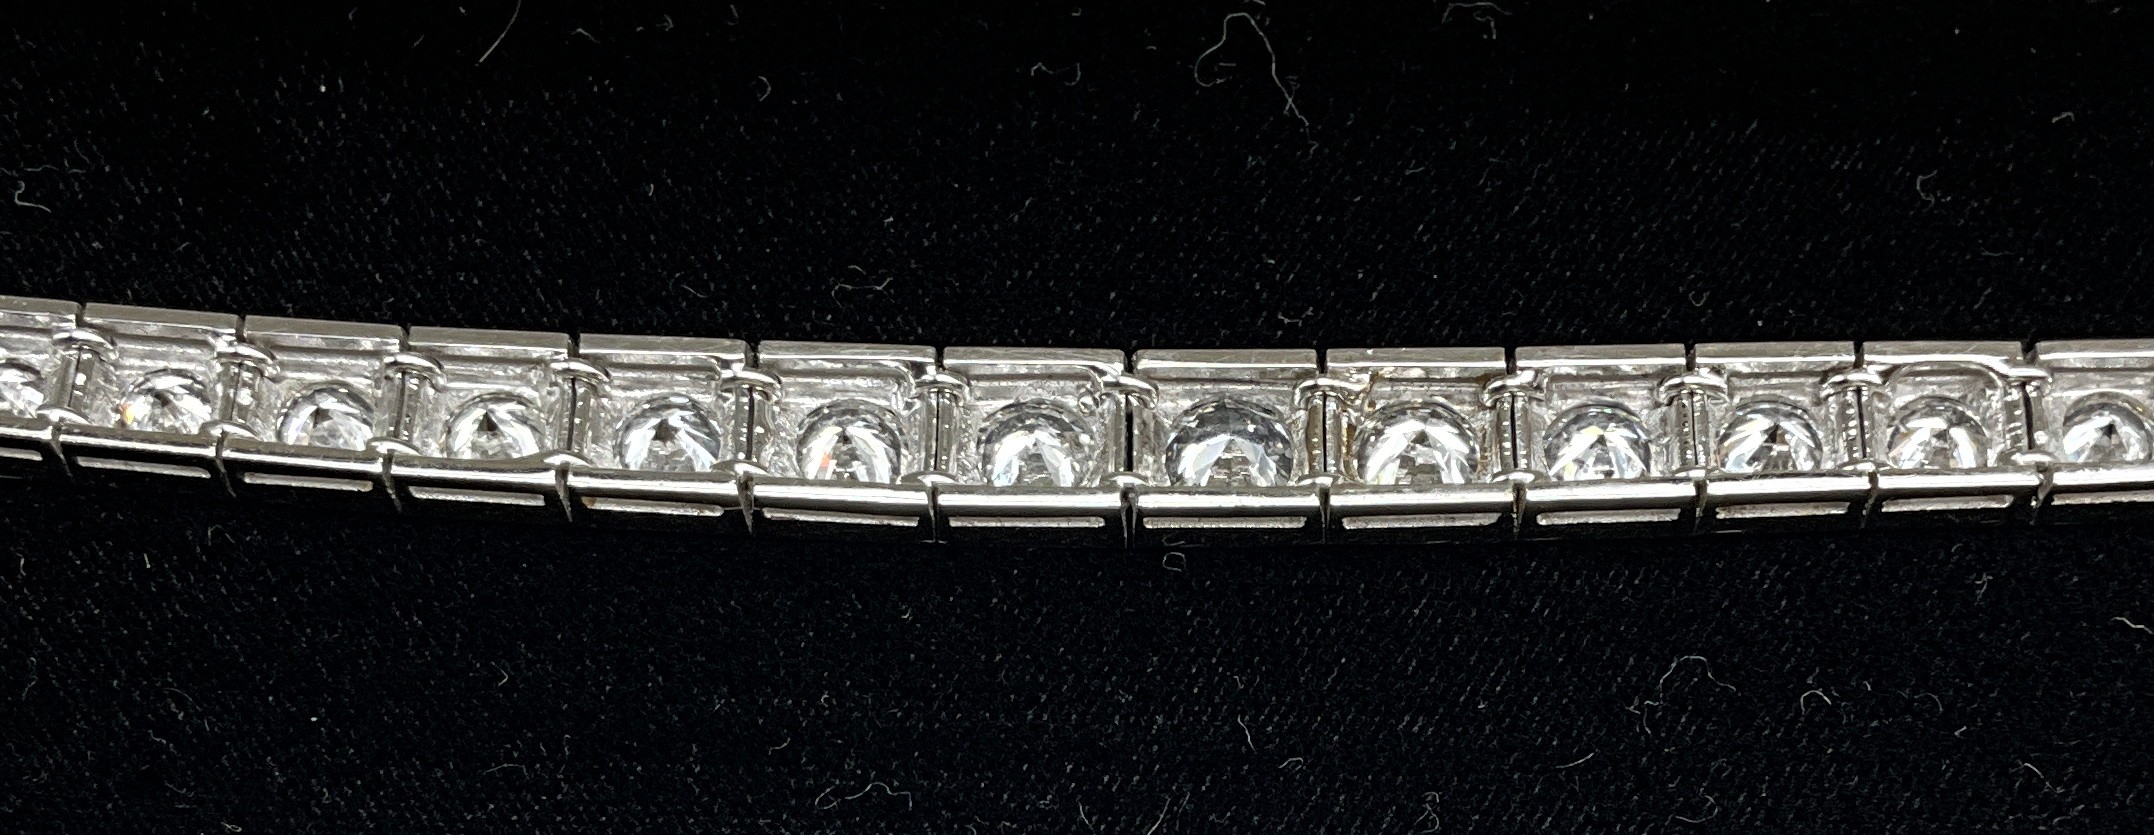 18-CARAT GOLD TENNIS BRACELET WITH THIRTY-ONE GRADUATING TRANSITIONAL BRILLIANT CUT DIAMONDS - Image 2 of 3